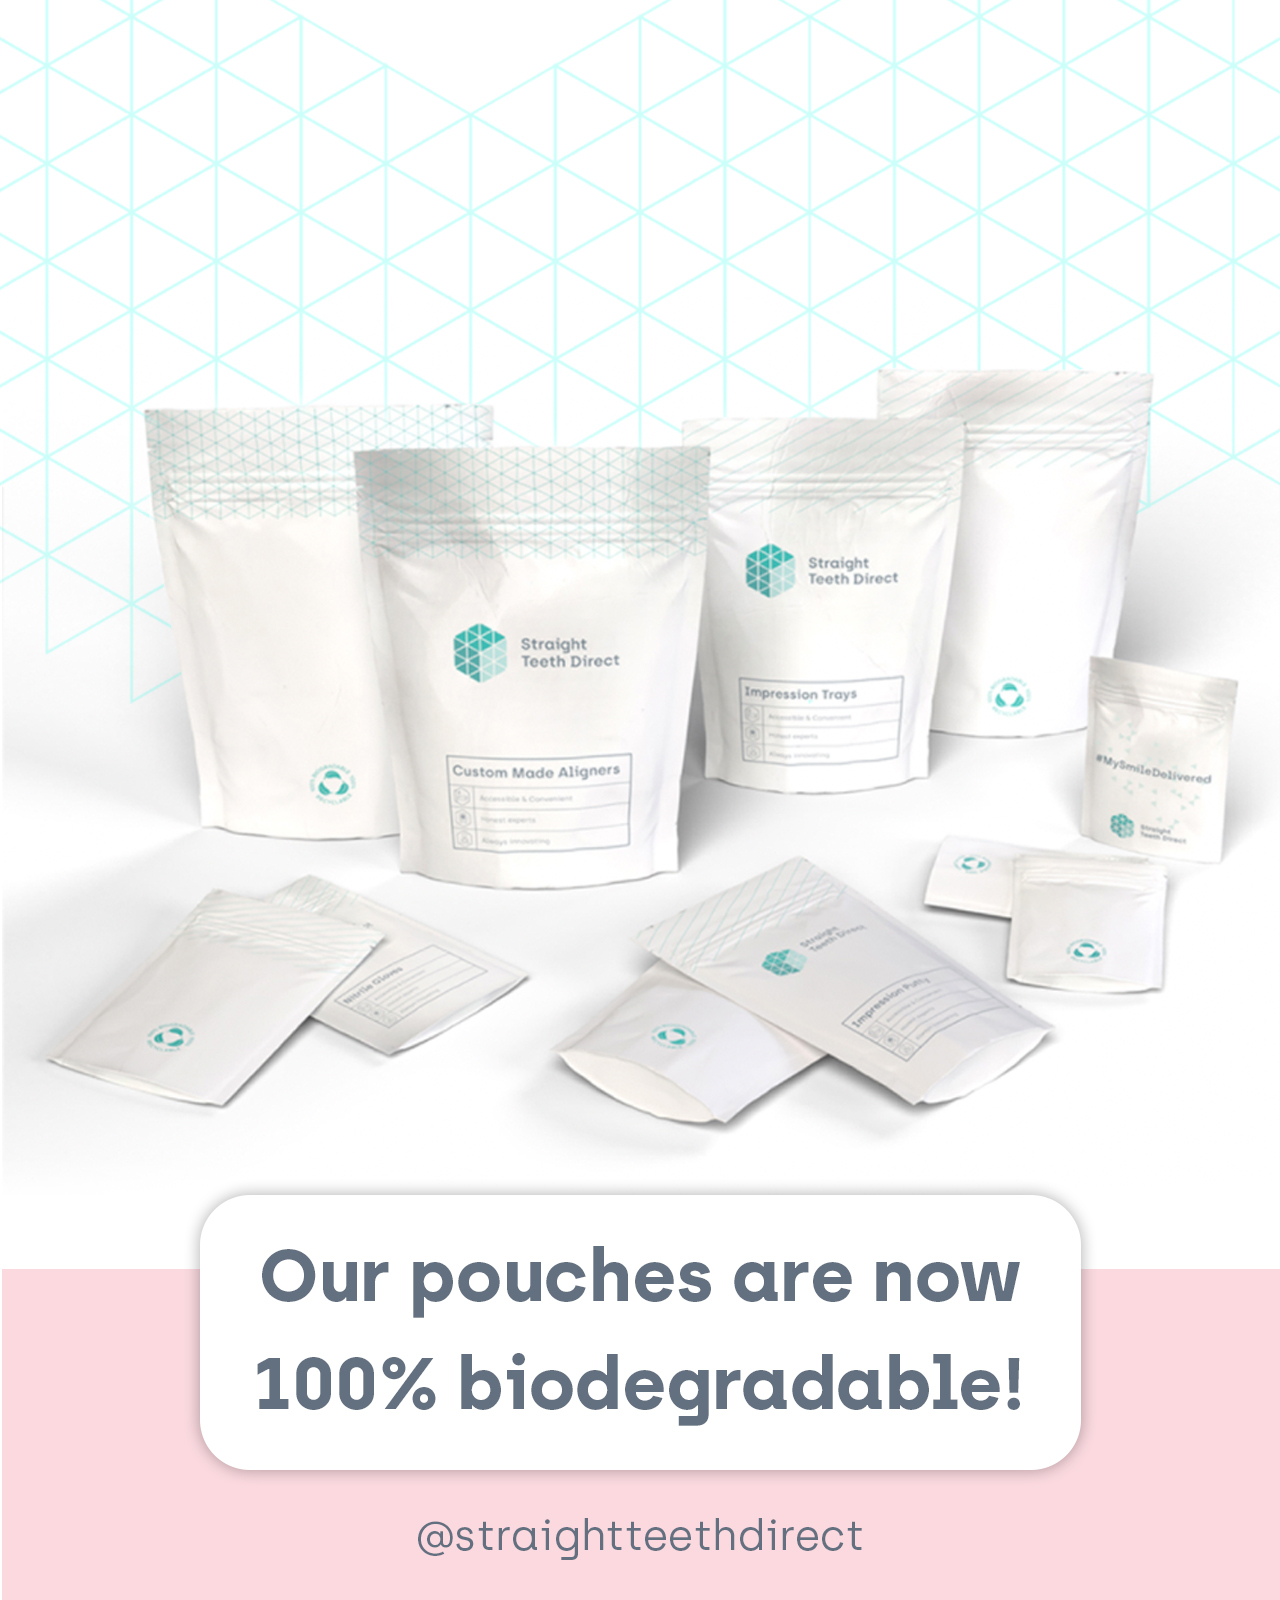 Straight Teeth Direct biodegradable pouches